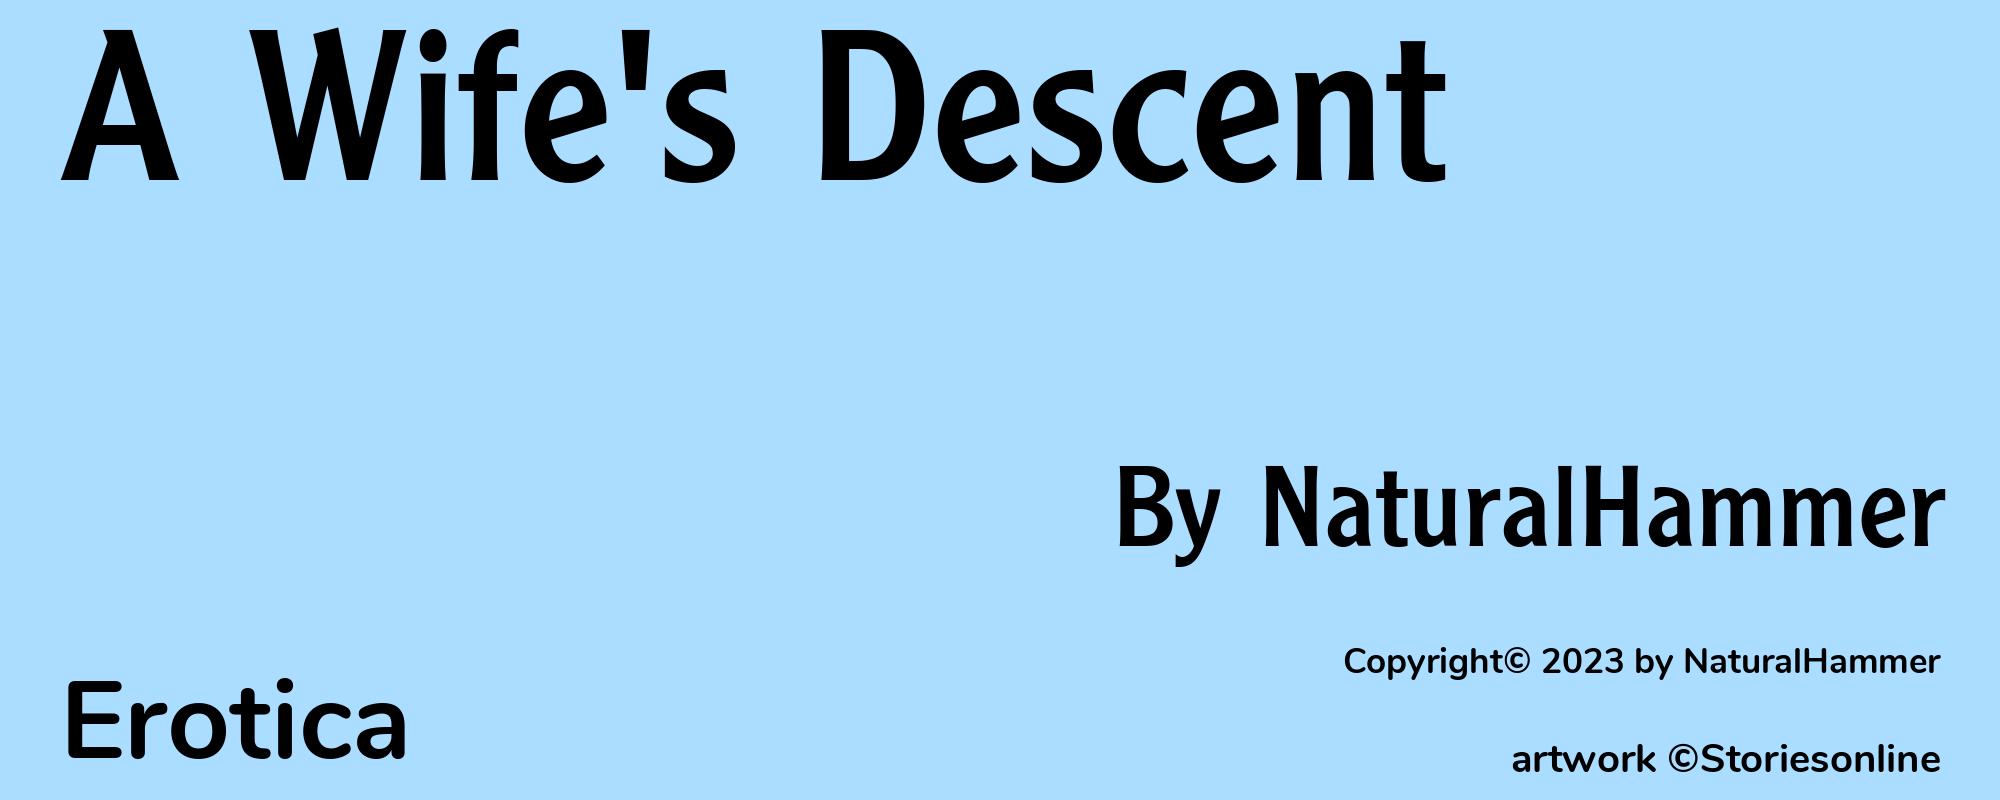 A Wife's Descent - Cover